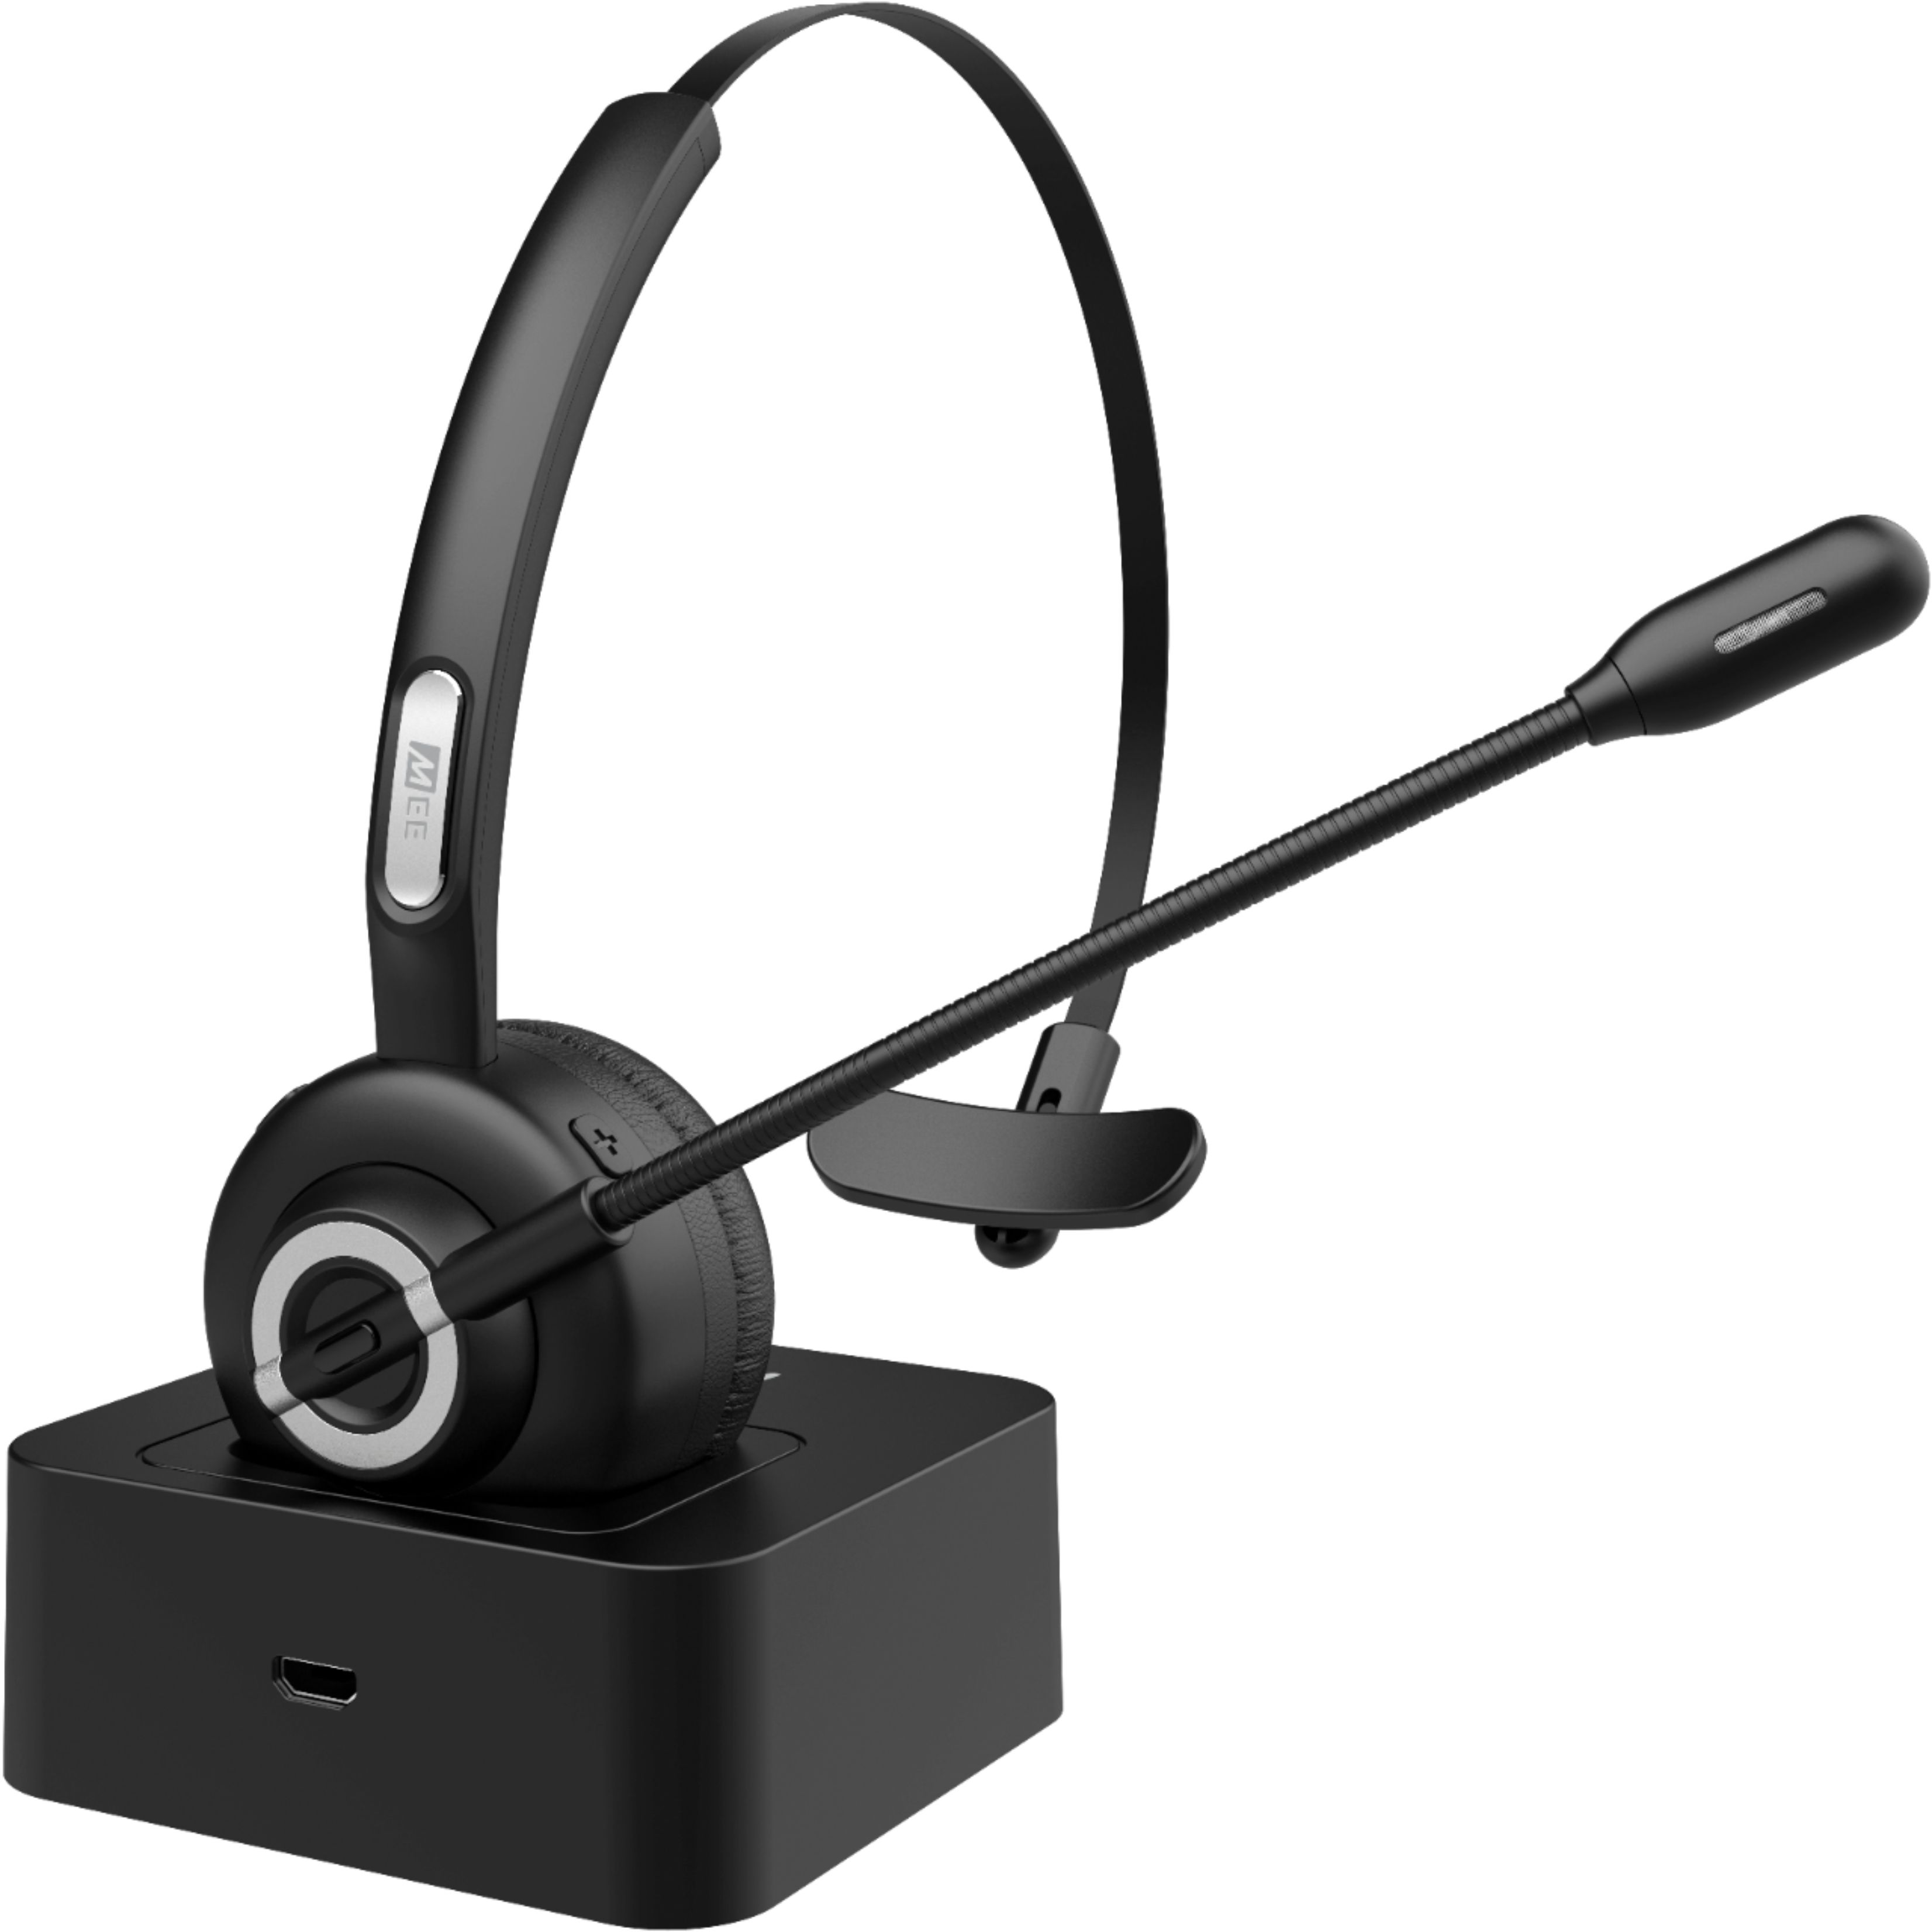 Mee Audio Bluetooth Wireless Headset With Boom Microphone And Charging Dock H6d Best Buy